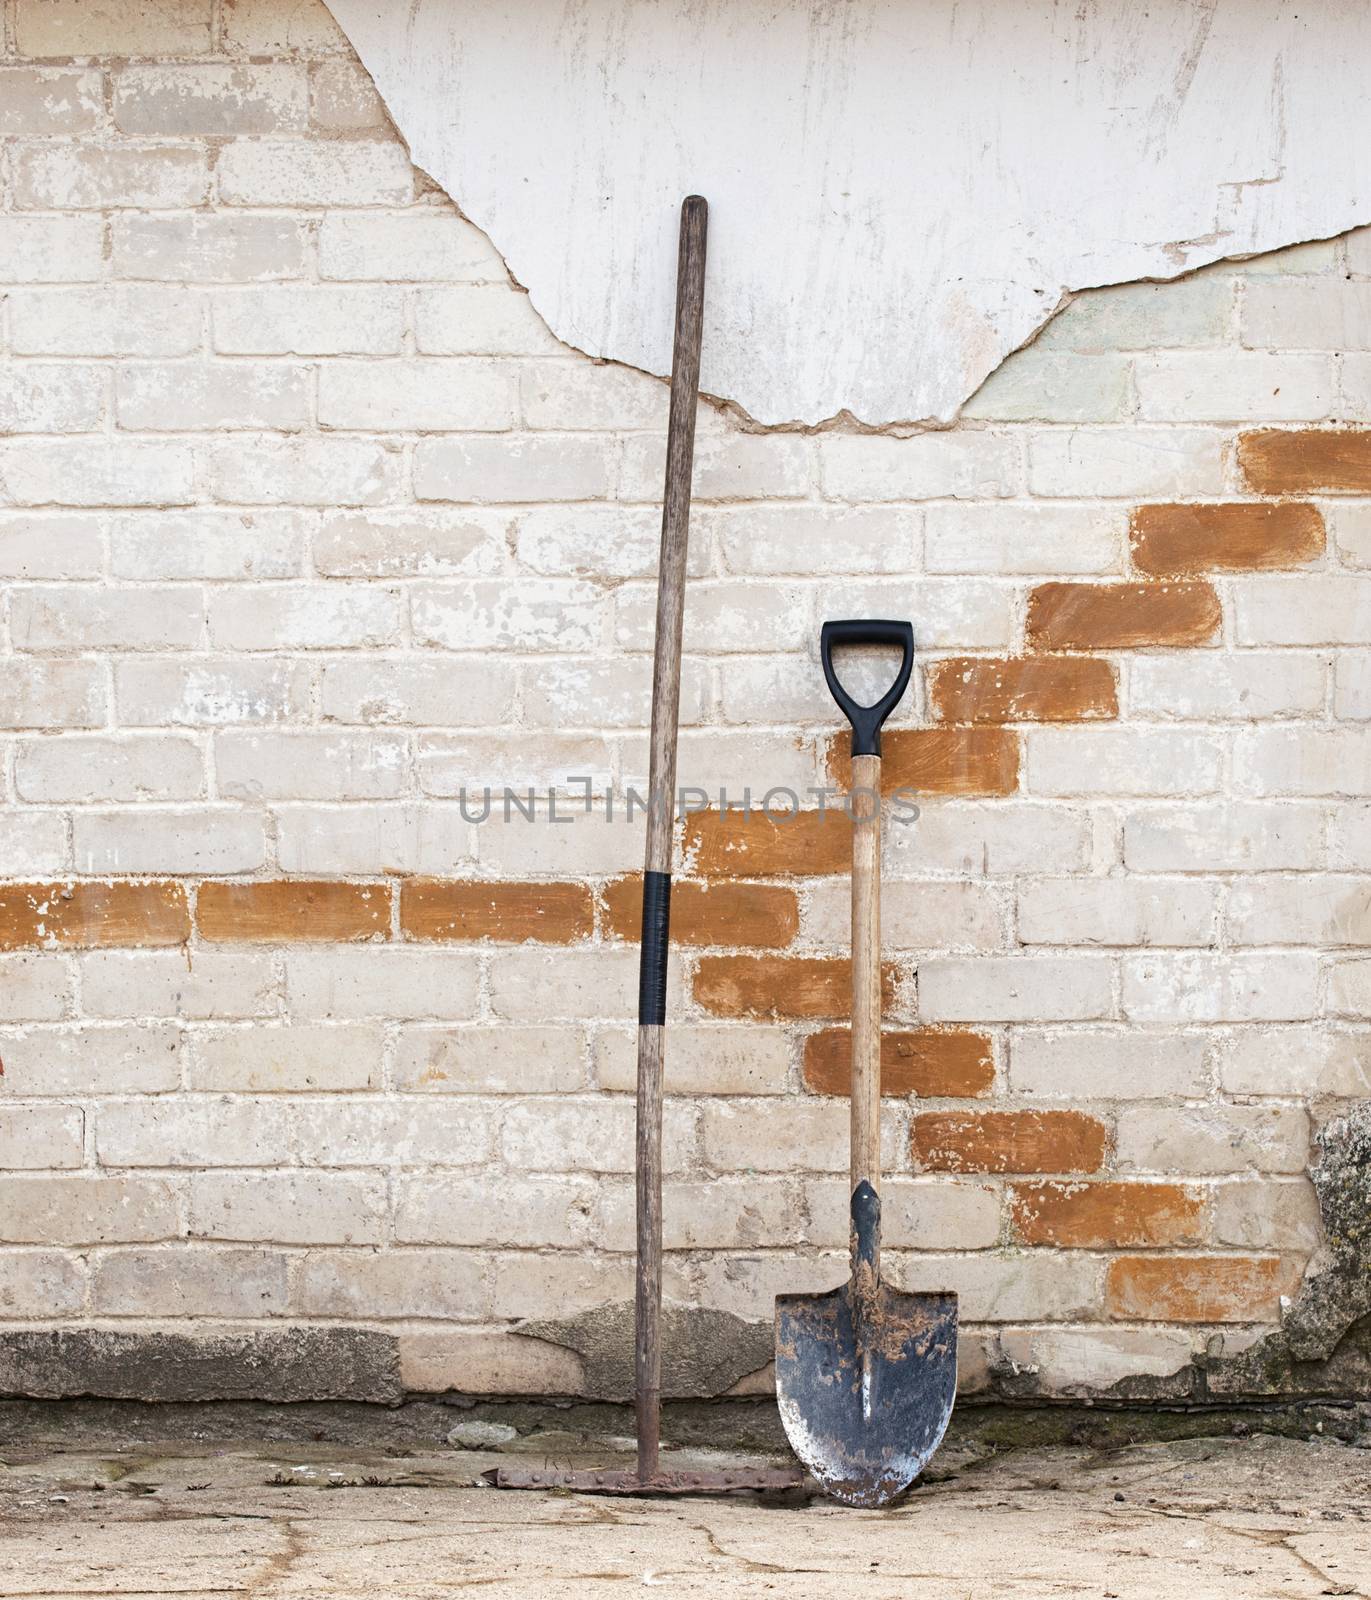 shovel and rake near the wall, ready for spring work in the garden